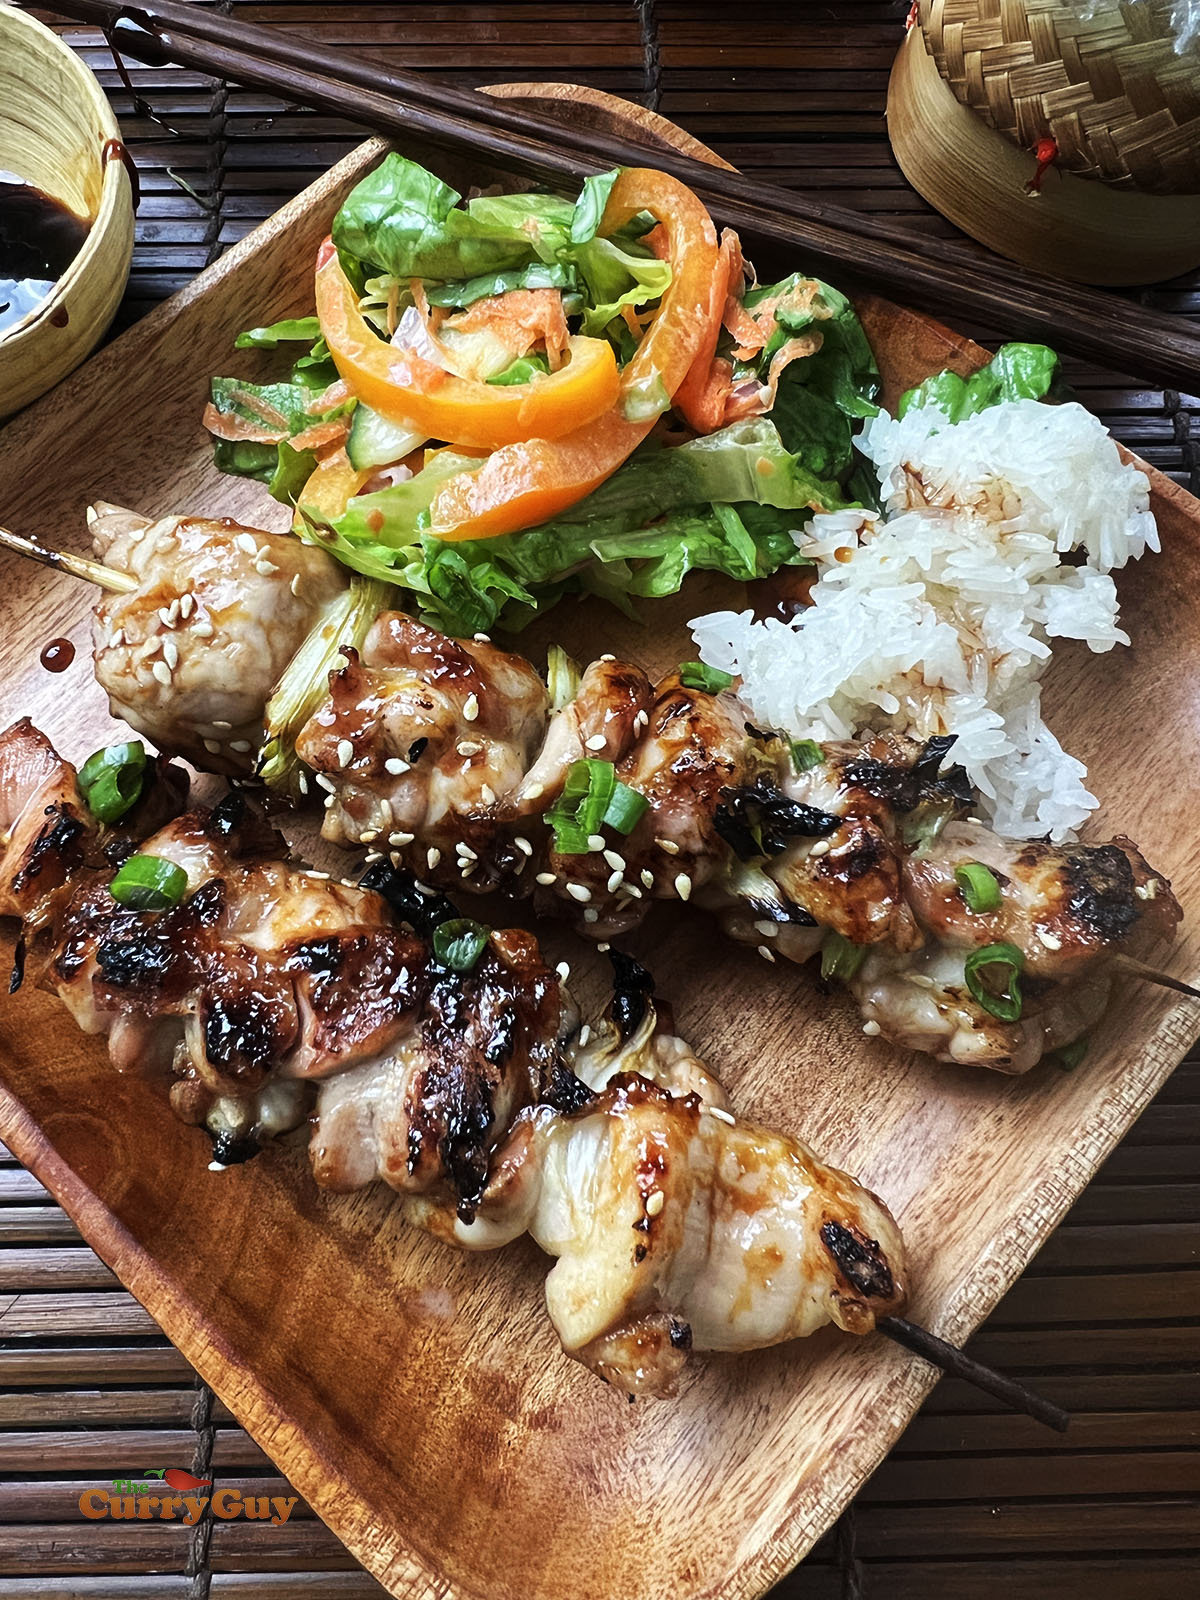 Chicken skewers served with rice and salad.